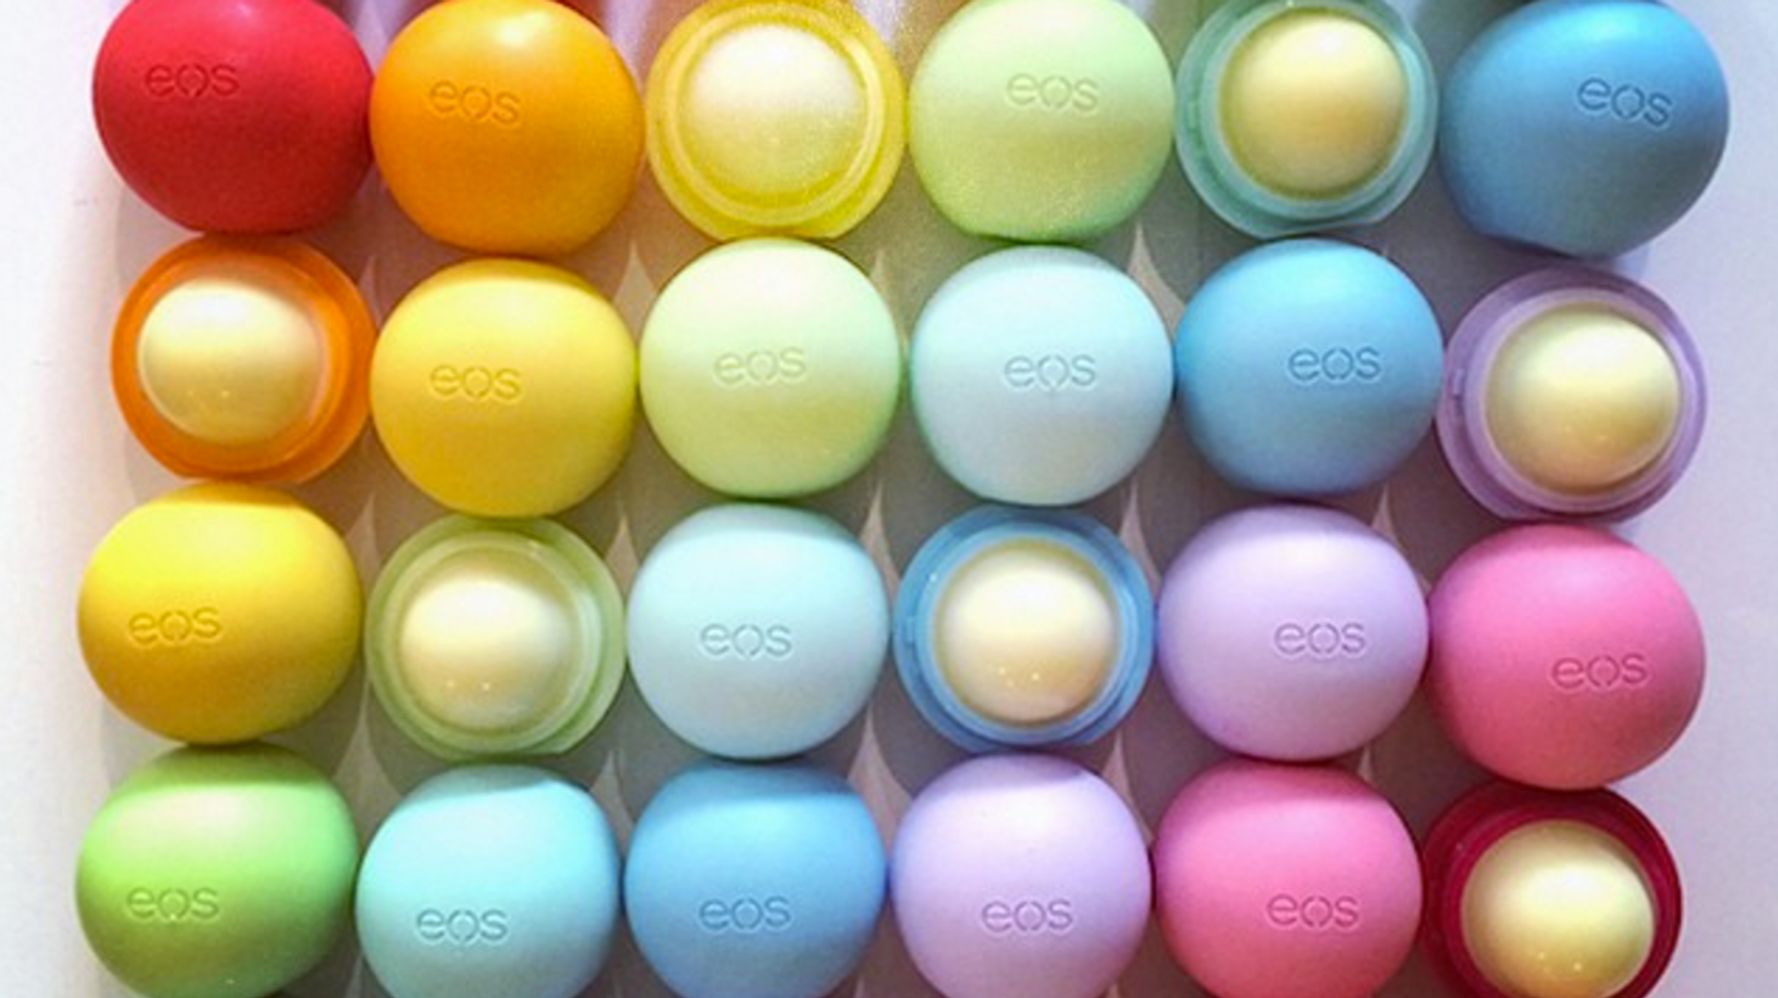 The Health Reason People Are Suing EOS Lip Balm